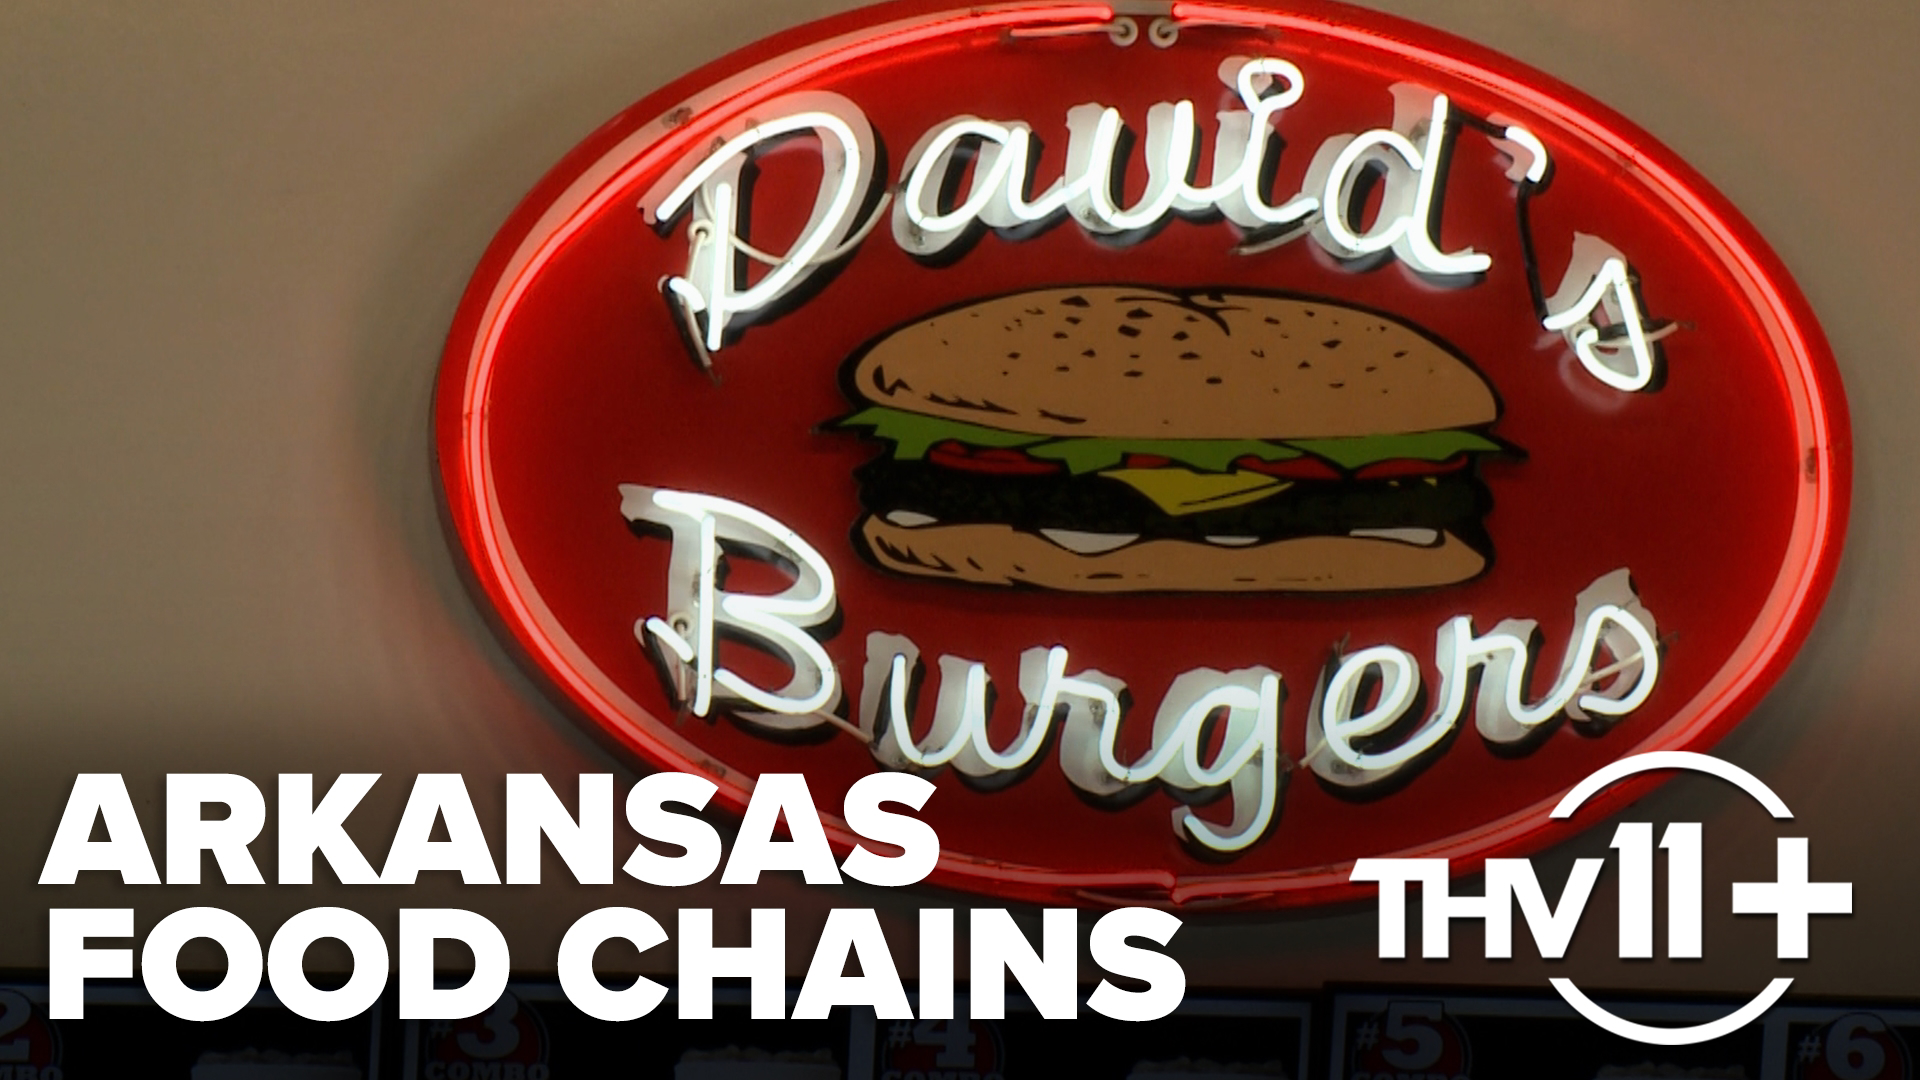 In July 2017, we looked at three Arkansas based food chains and what makes each of them special. We went to David's Burgers, Slim Chickens, and Tacos 4 Life.